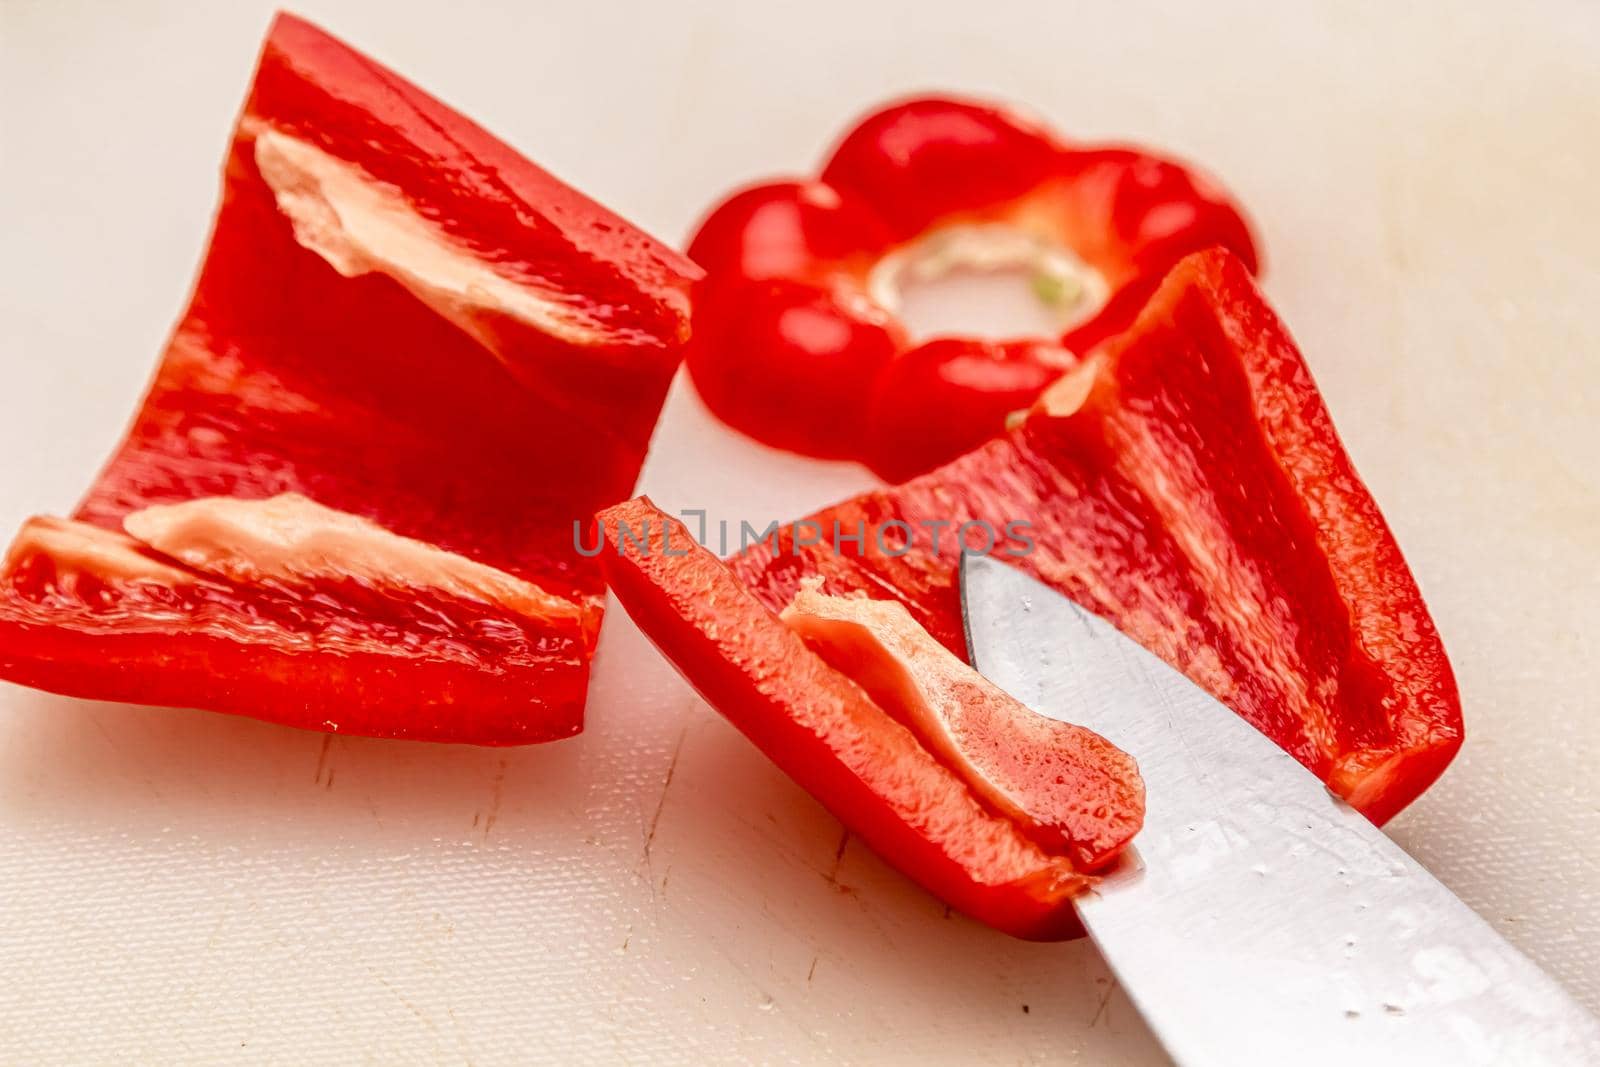 Close up view of a red bell pepper cut in half. The seeds are in the pepper on a cutting board. A knife is in the background.